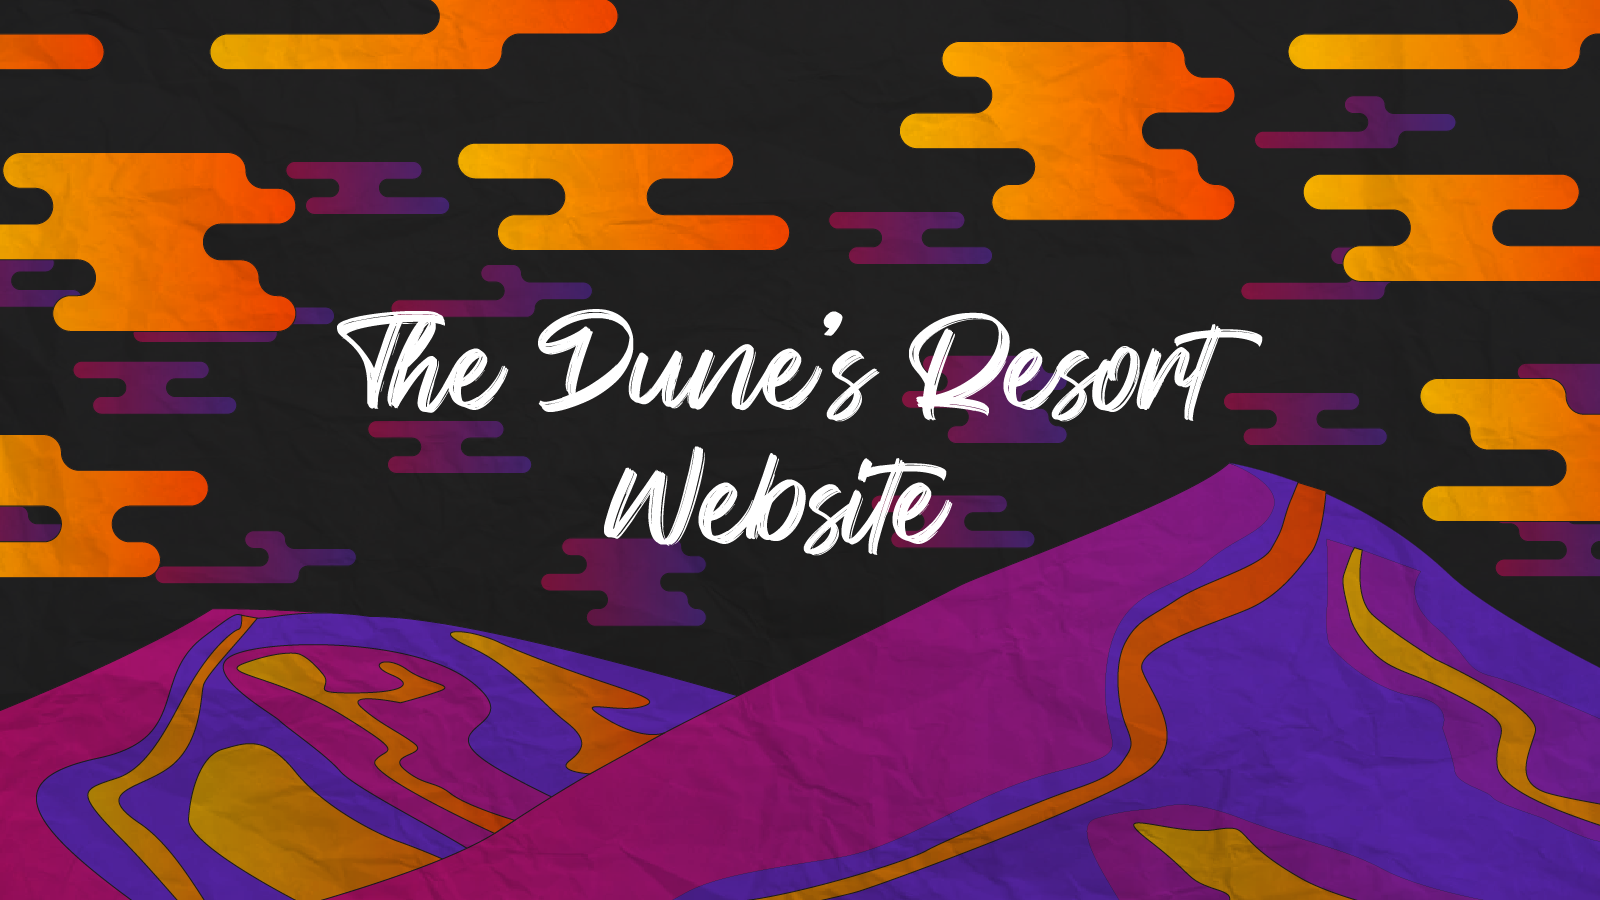 A vector illustration of purple mountains and orange clouds behind the words, "The Dunes Resort Website"